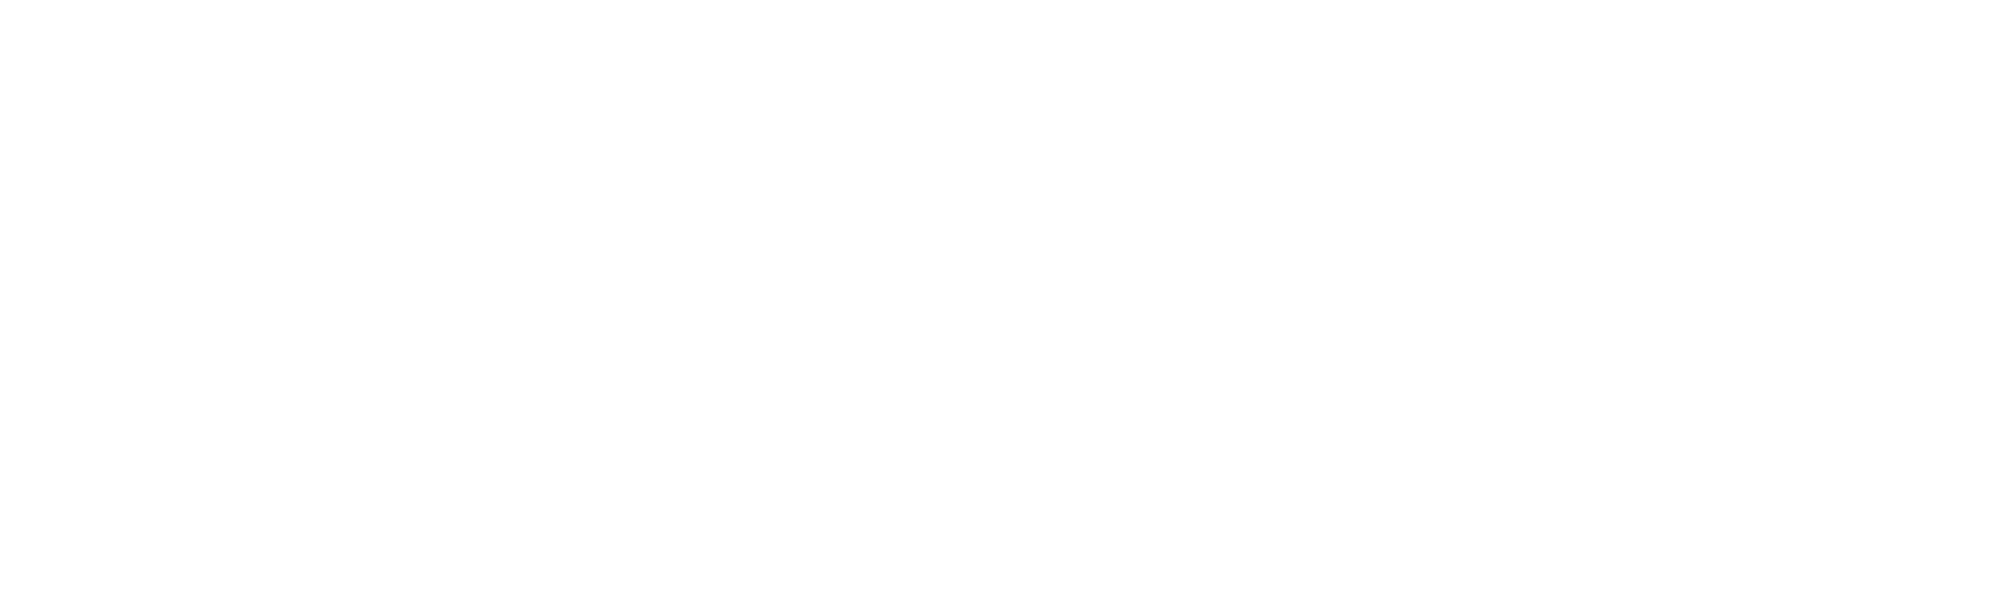 HABAU Group - part of the family